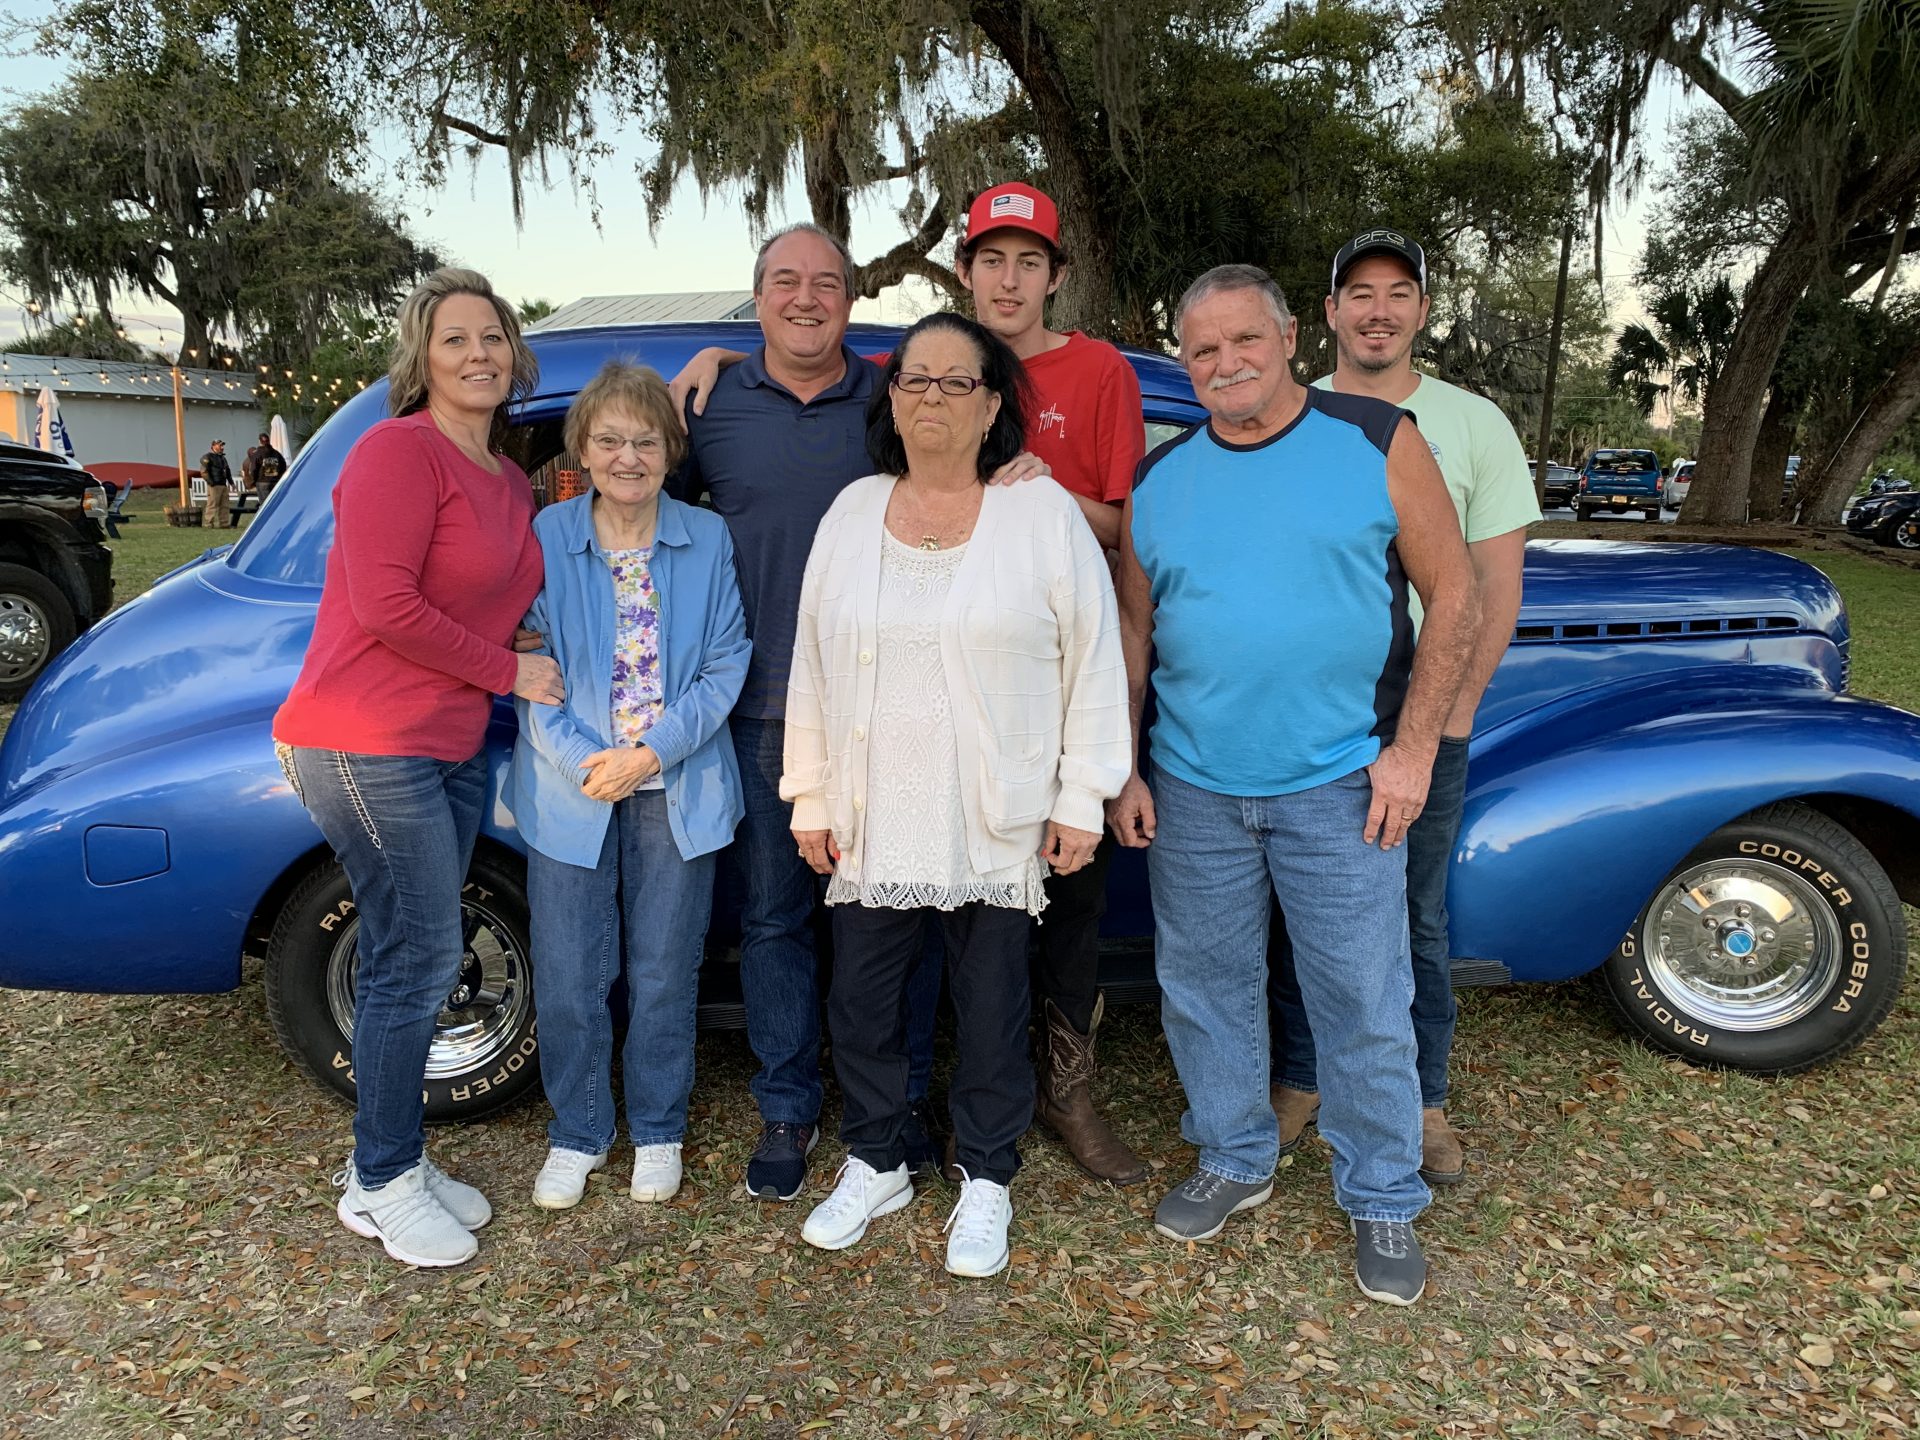 Mom’s 83rd Birthday, I took her in my 1940 Chevrolet. She said riding in it brought back a lot of old memories. In photo is my wife Brenda, son’s Jacob and Derek, Mom and Brenda’s Mom and Dad Ronald and Kathy Wheeler.